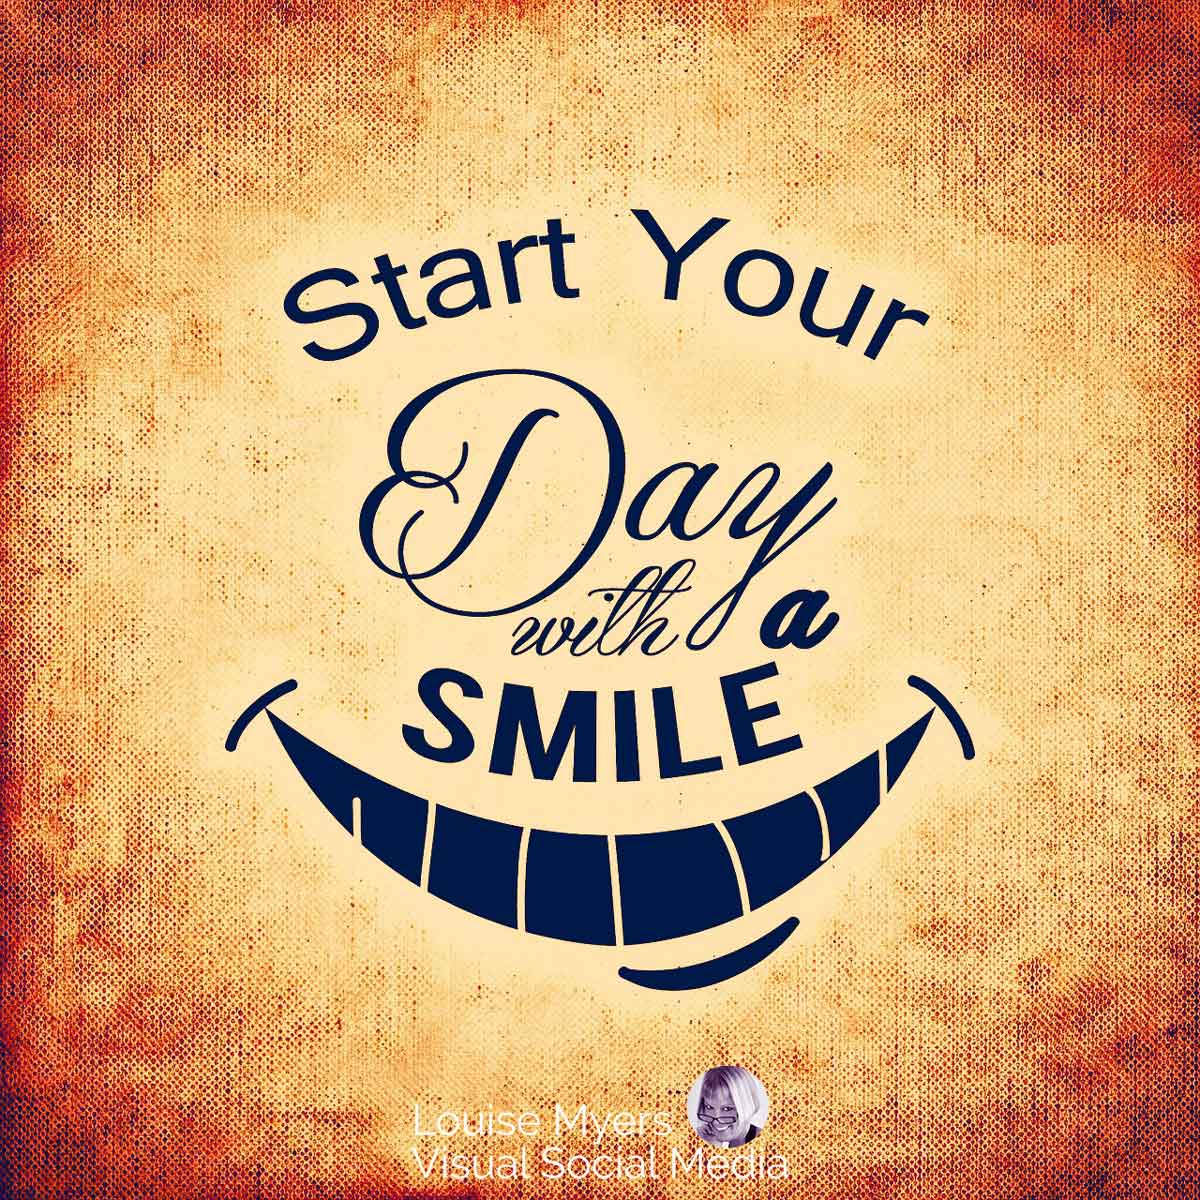 graphic of smile on orange canvas says start your day with a smile.